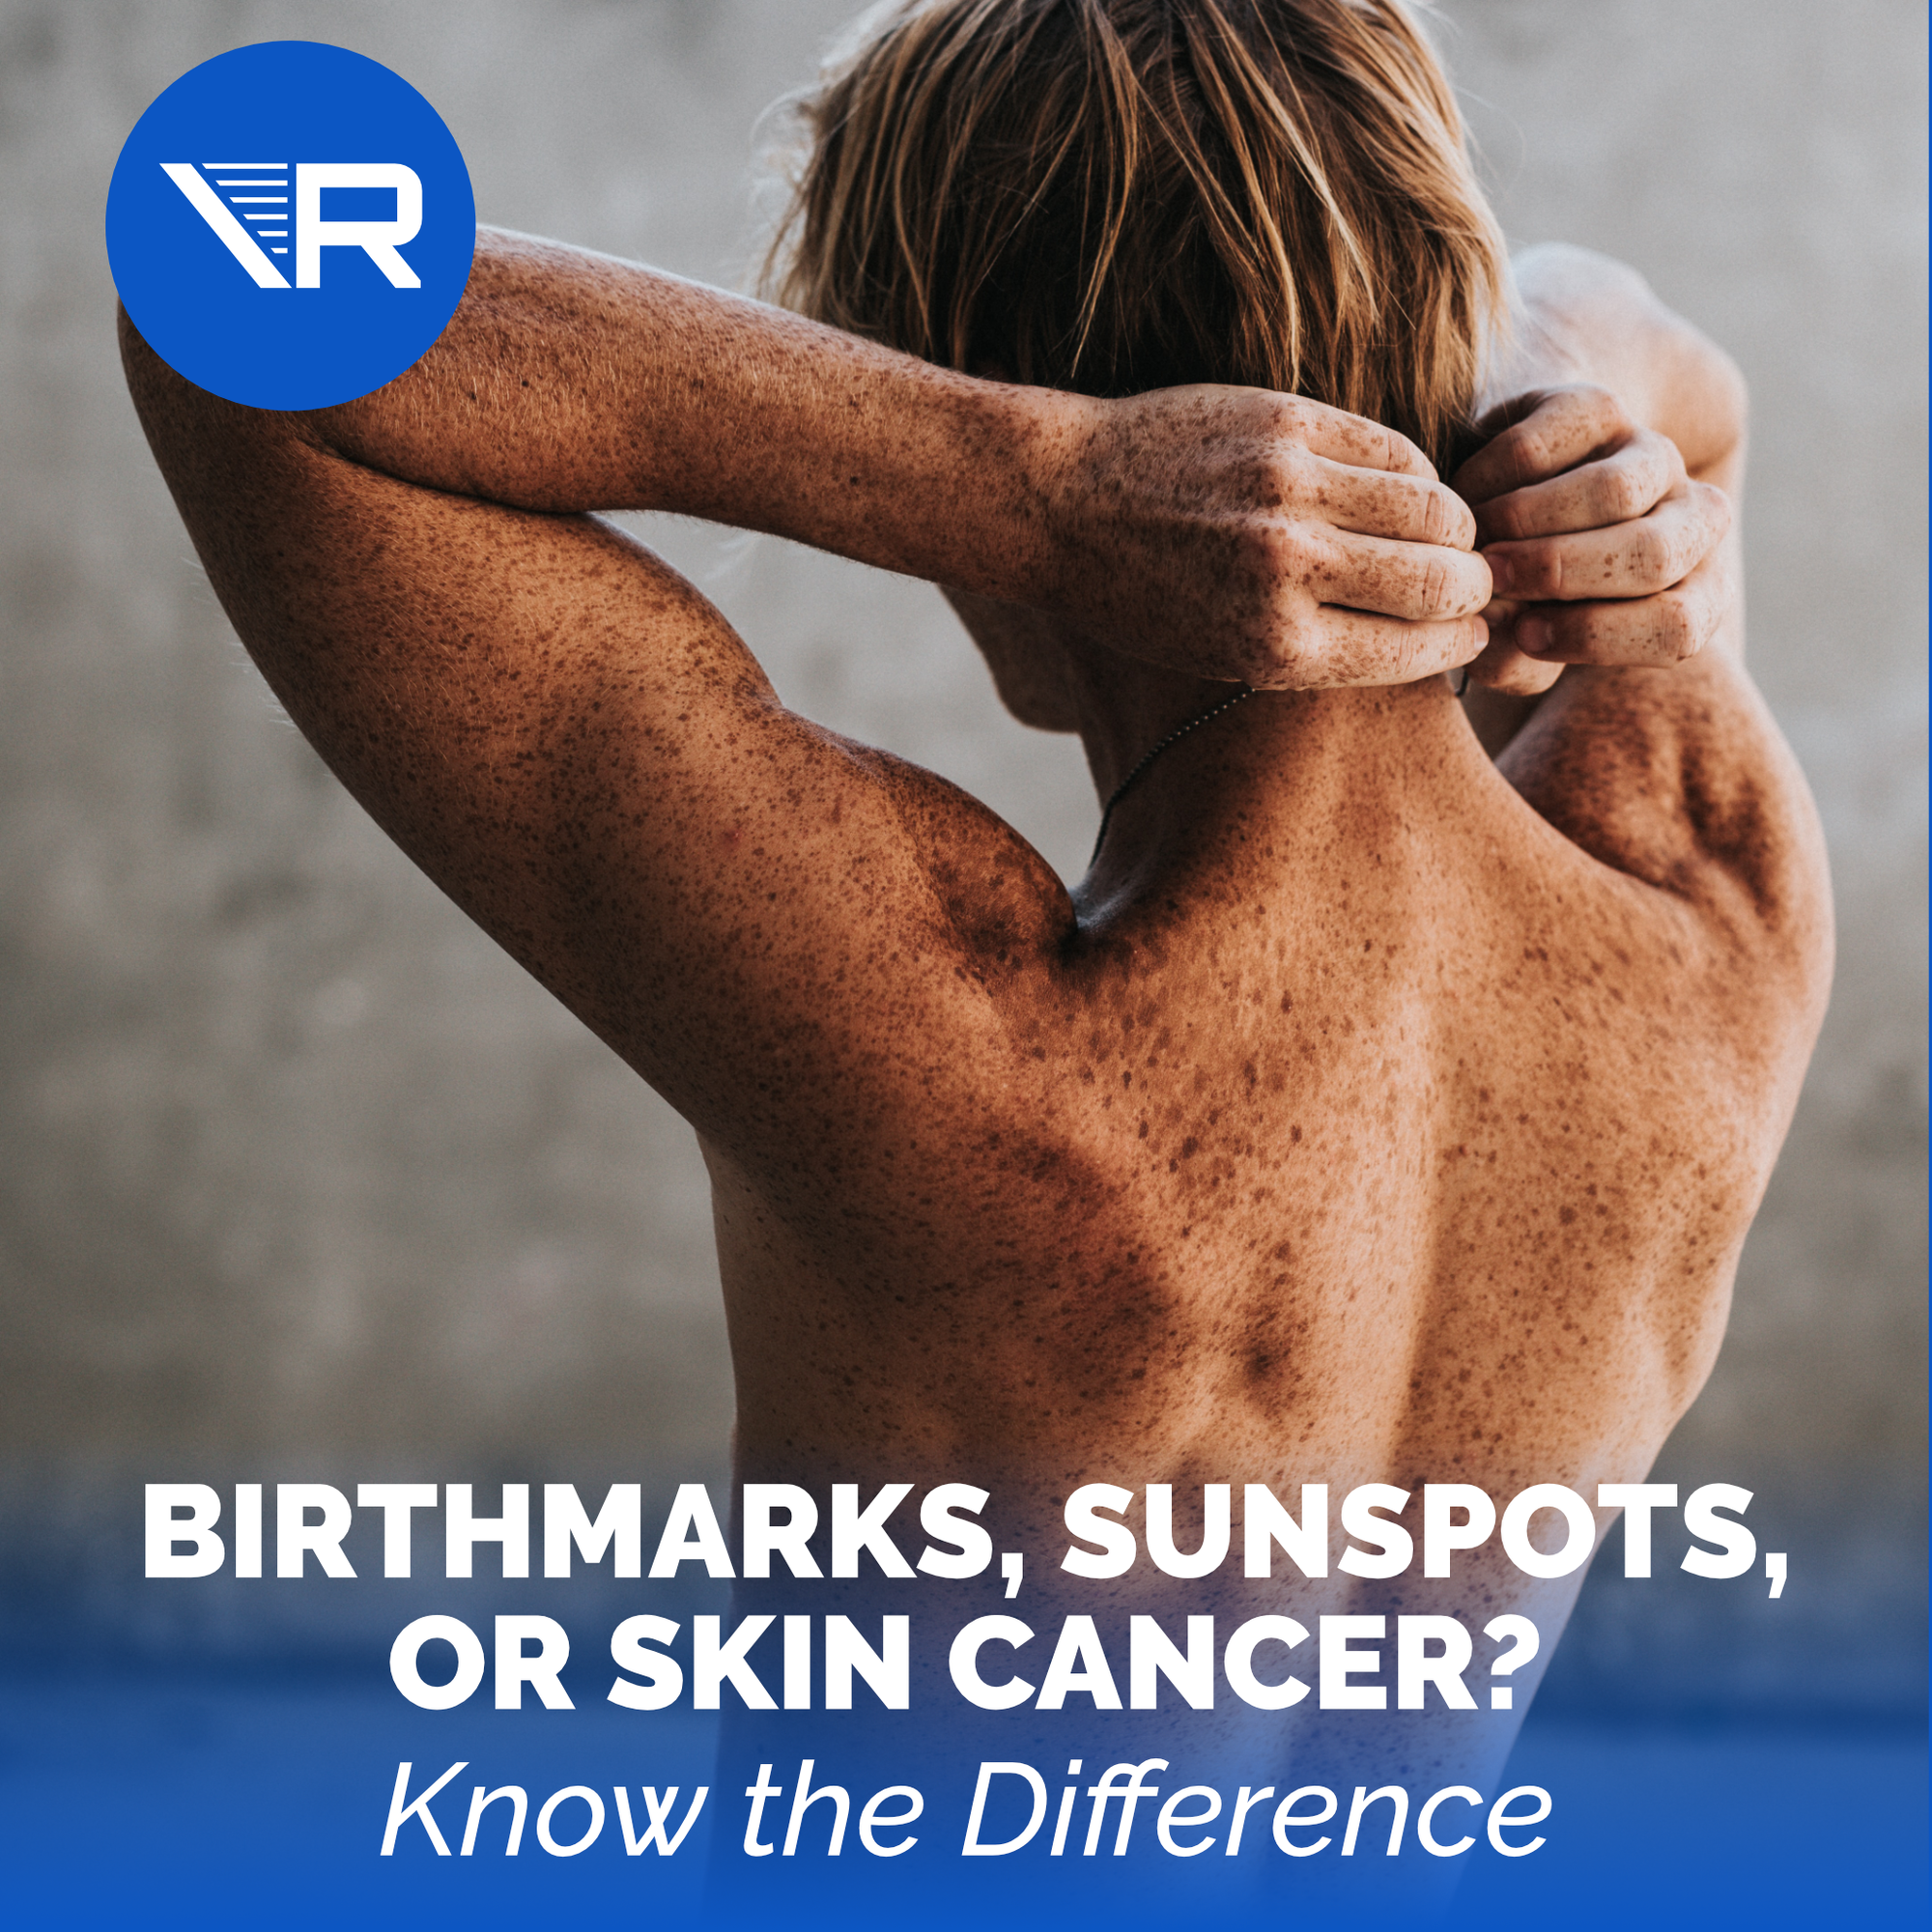 Birthmarks, Skin Cancer, or Sunspots on Skin? Know the Difference